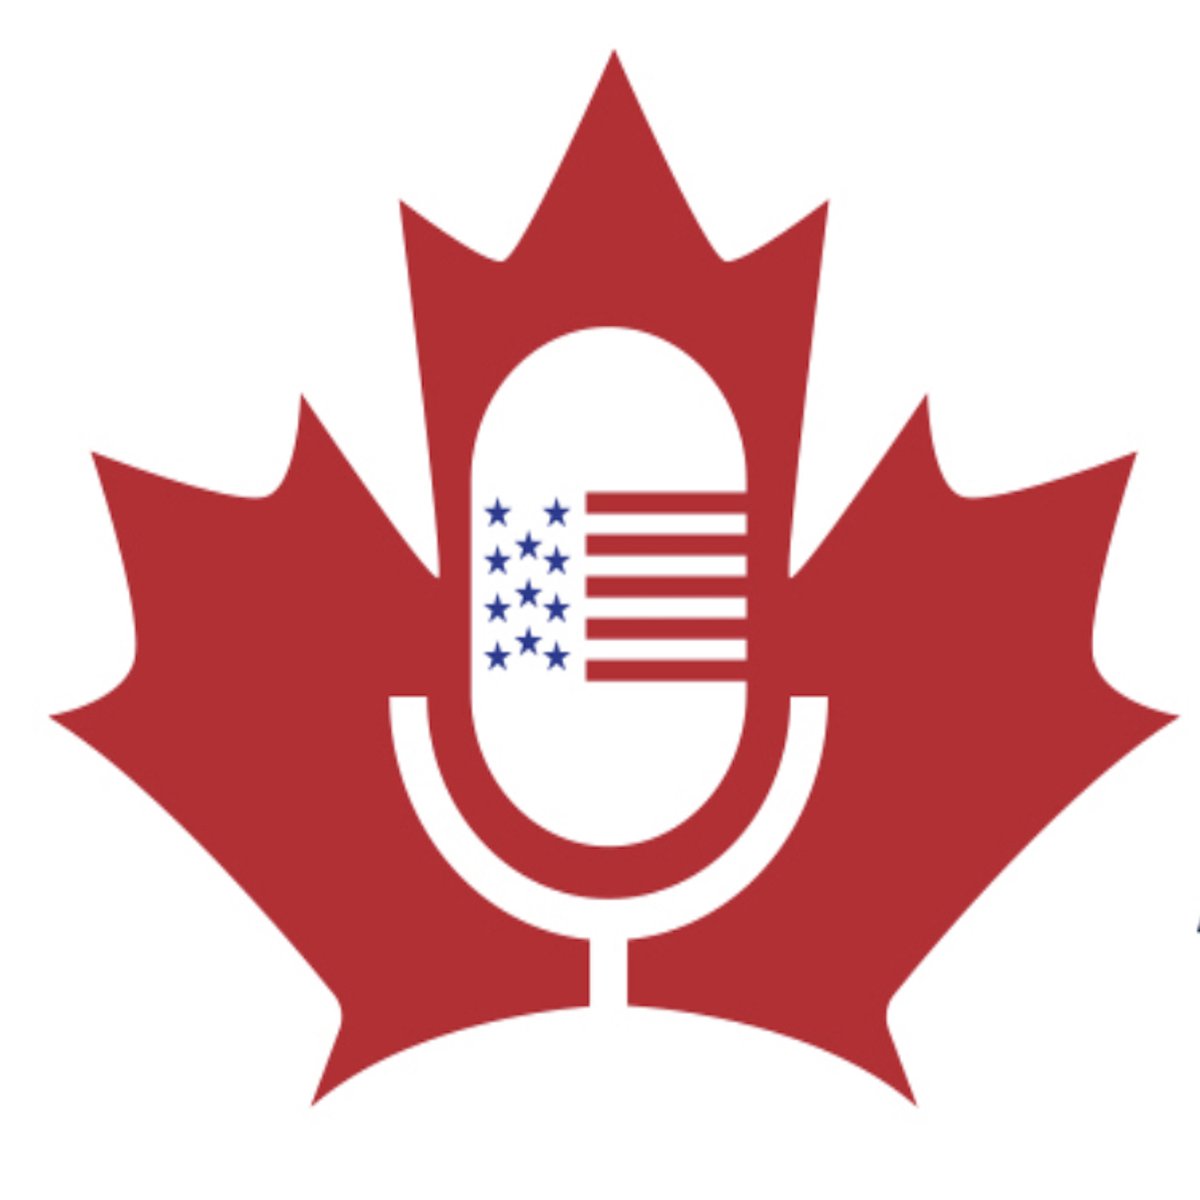 🎧 Episode 49 of the Arrive Podcast for Canadians - Your US Immigration Questions, Answered!

🔍 A must-listen for every Canadian🇨🇦

📻Tune in now: ow.ly/gUfB50R6shA

#USImmigrationLaw #TNVisa #ImmigrationPodcast #TravelTips #StayInformed #ArrivePodcast #Canadian